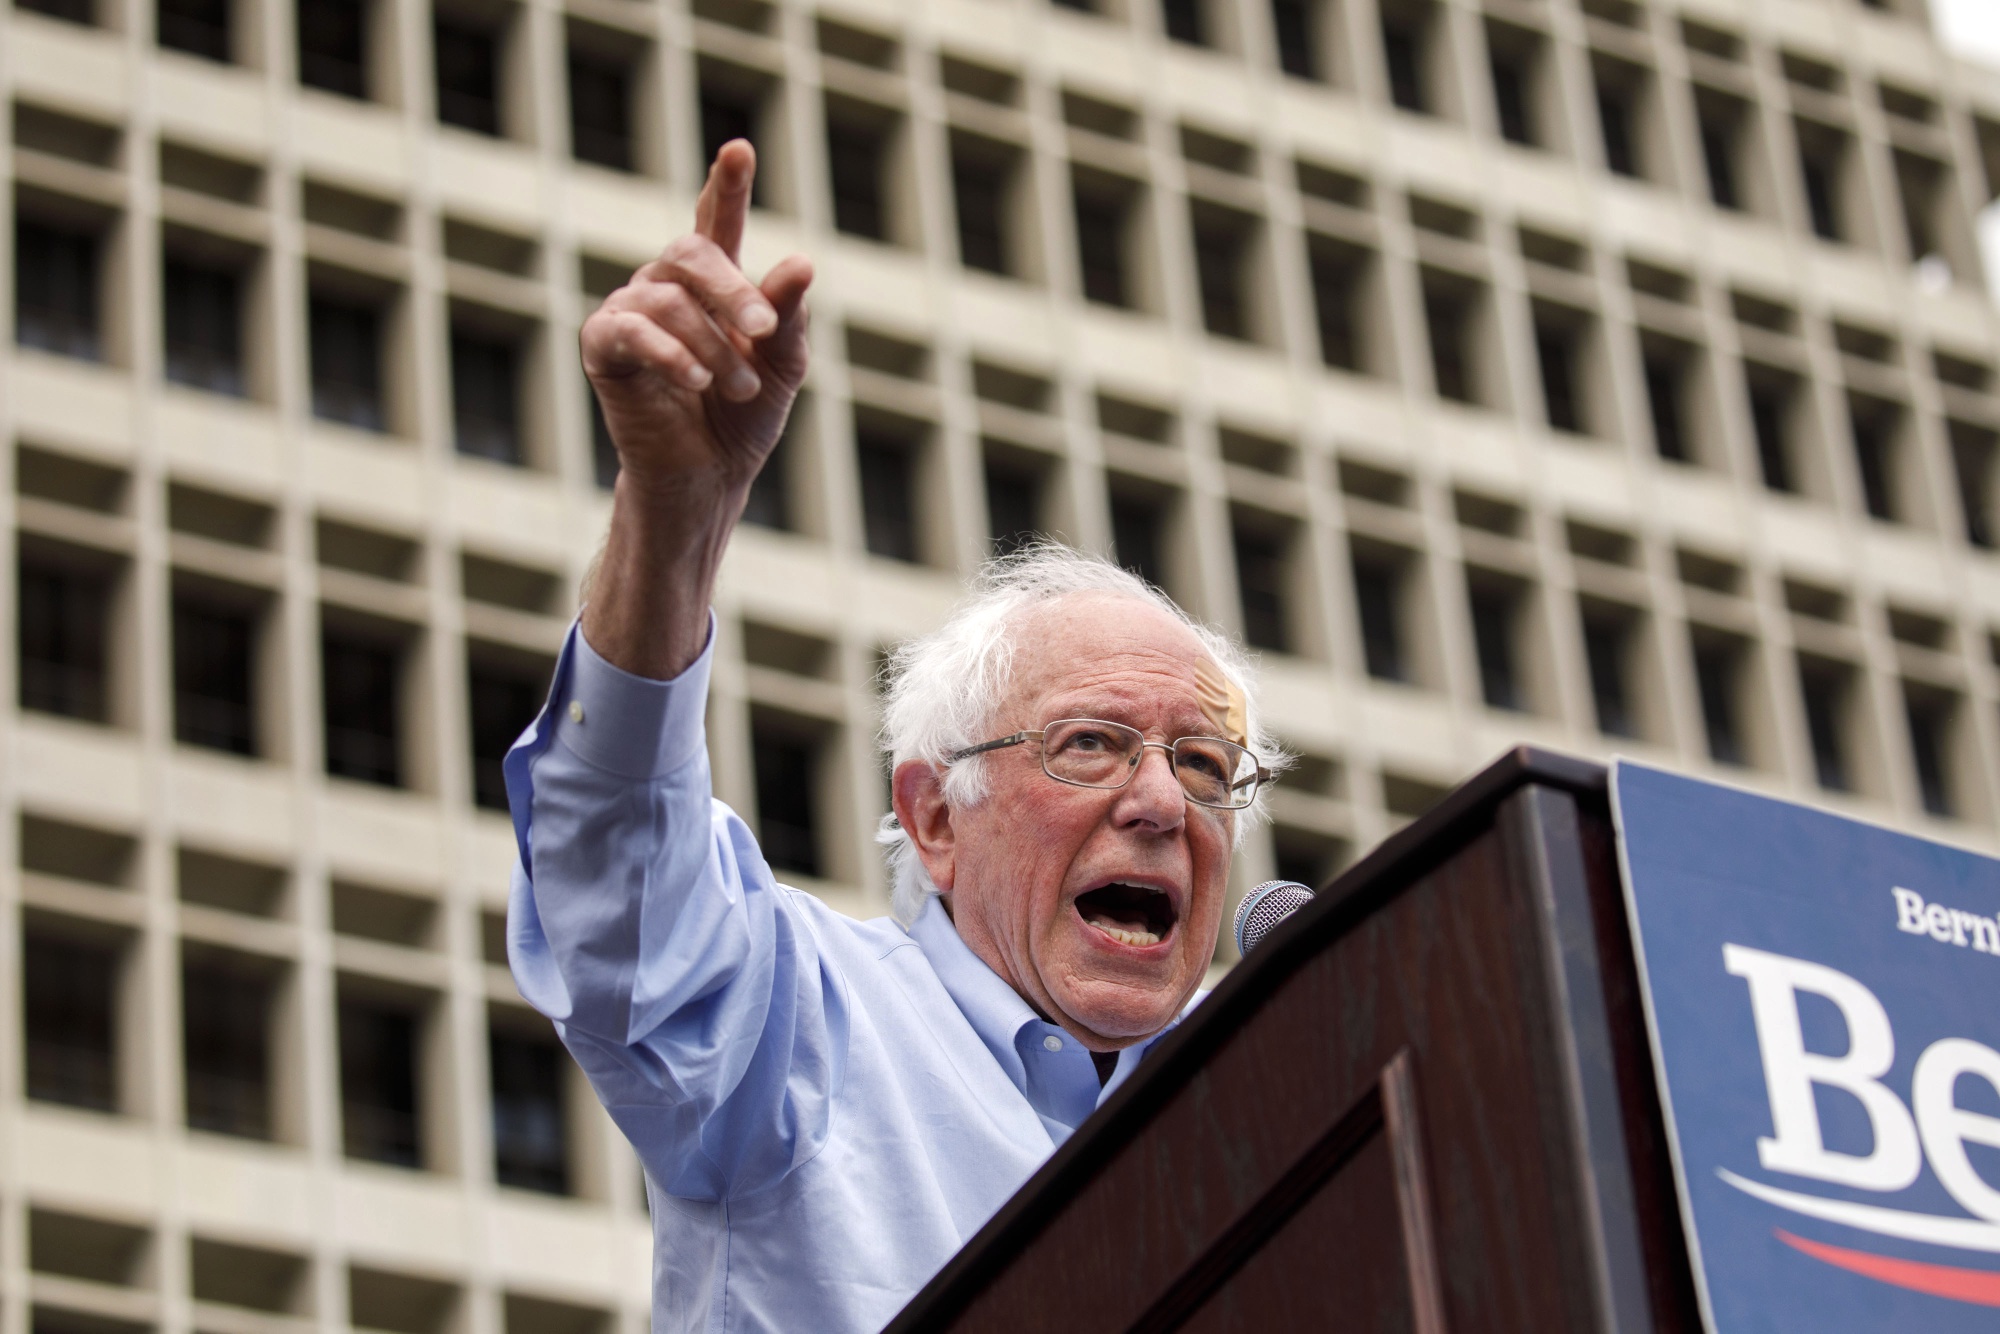 Bernie Sanders during a campaign rally in Los Angeles.